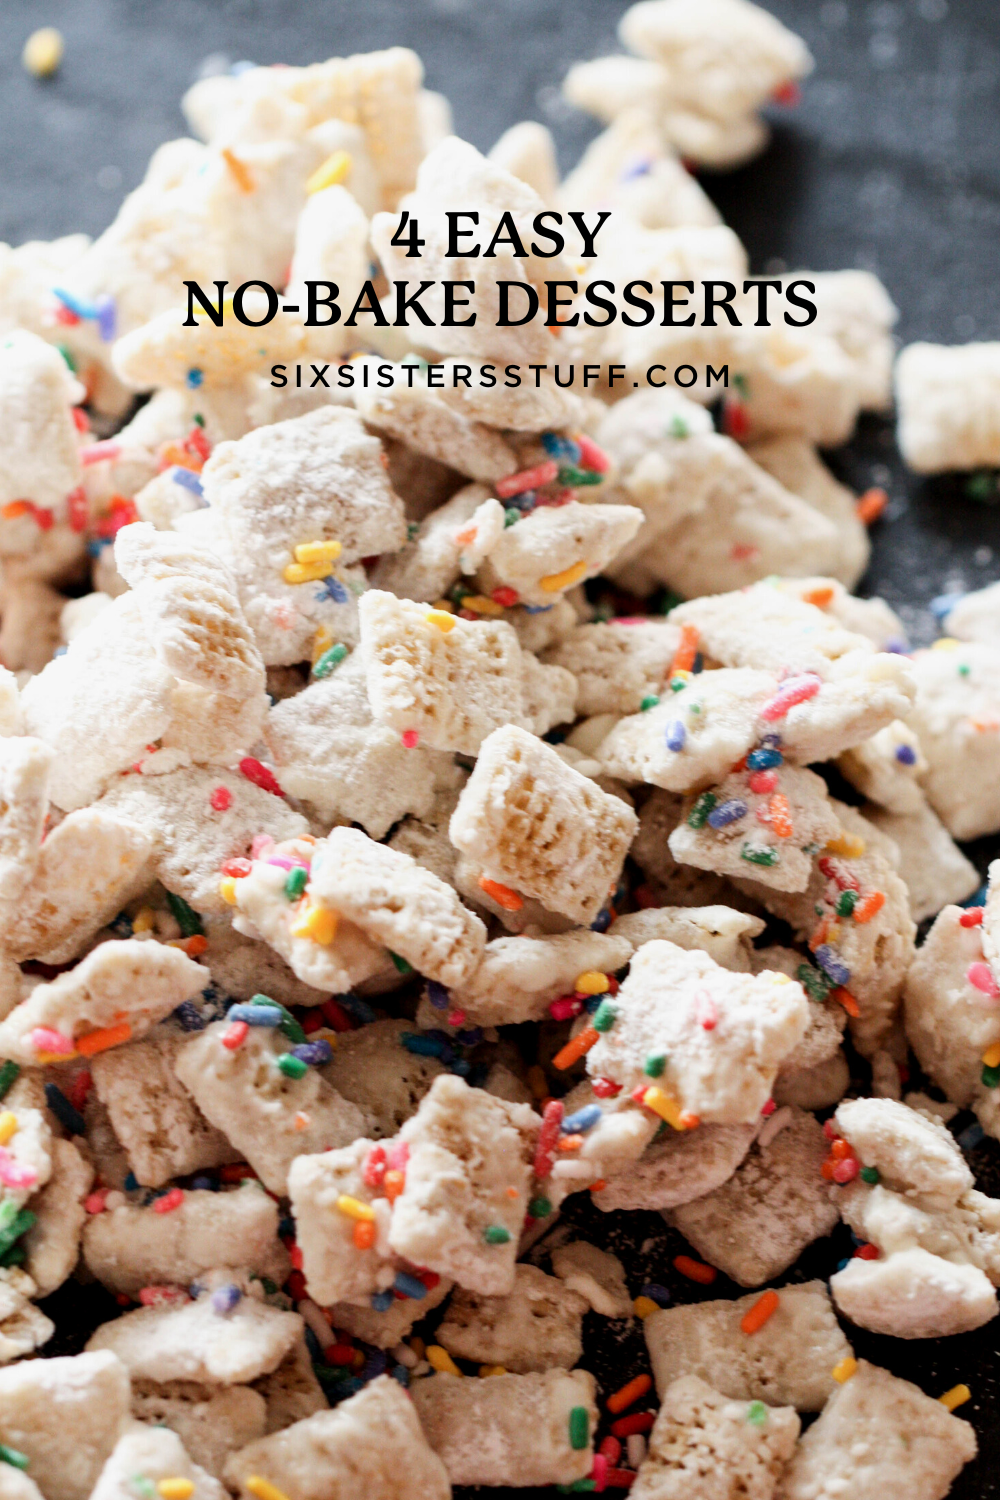 EASY 4 NO BAKE DESSERTS – Make them in just a few minutes